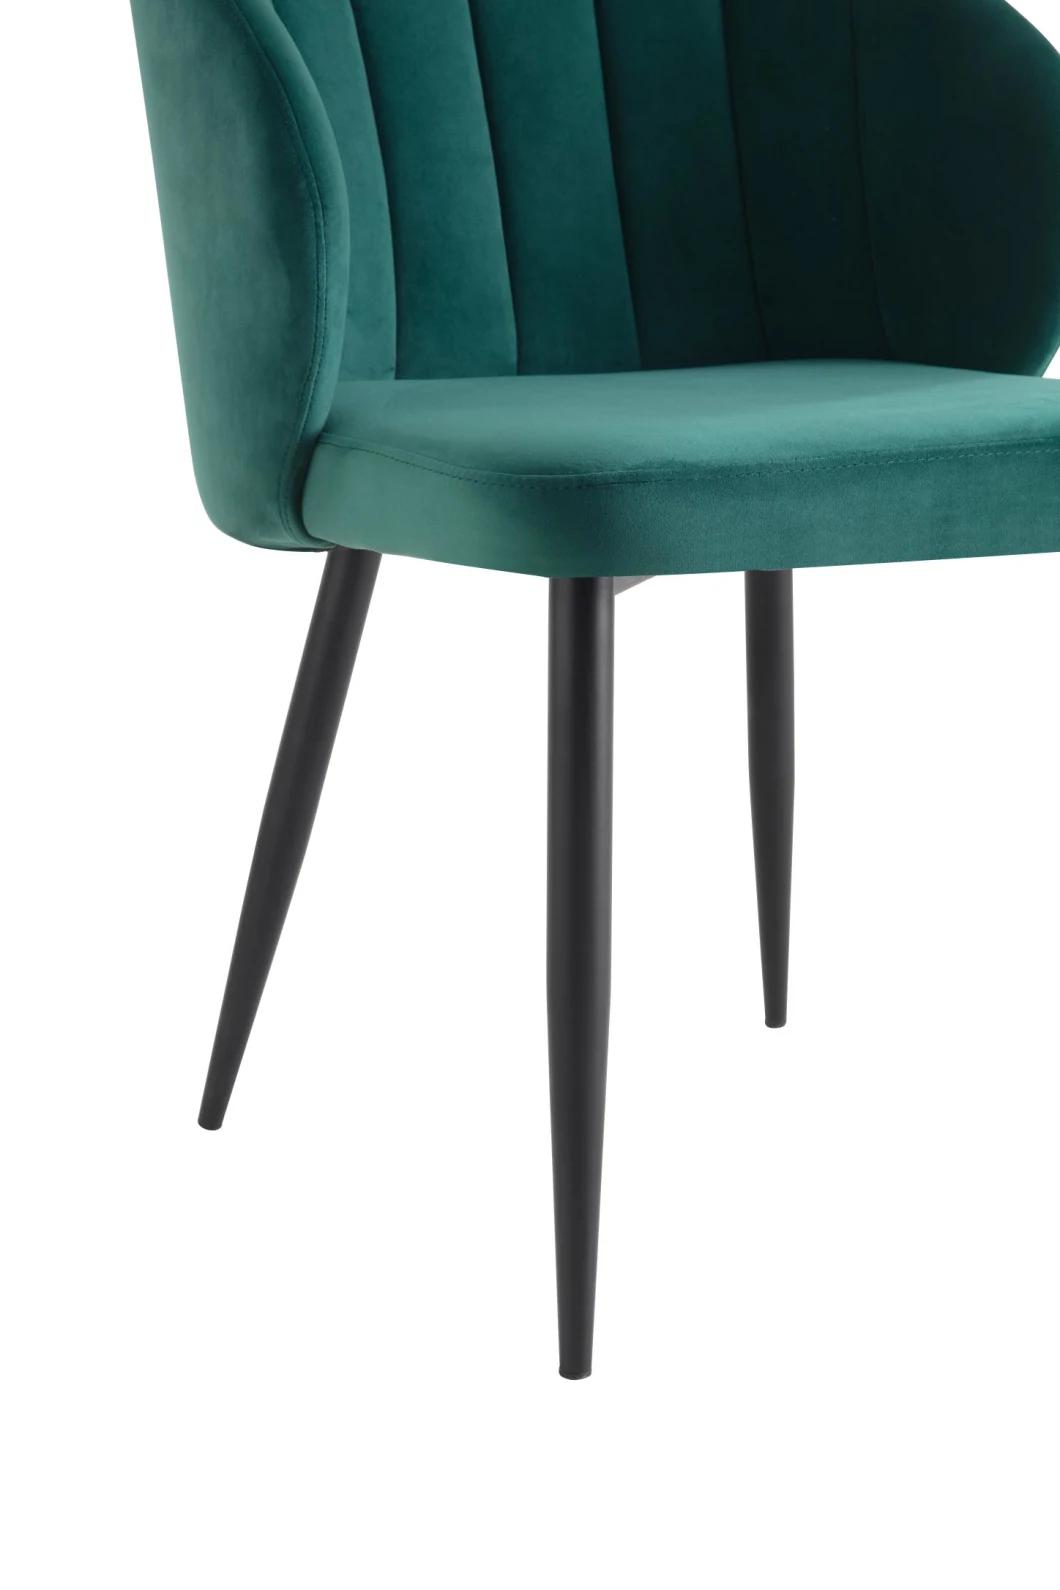 Hot Sale Modern Design Home Furniture Dining Chair Colored Velvet Dining Chair